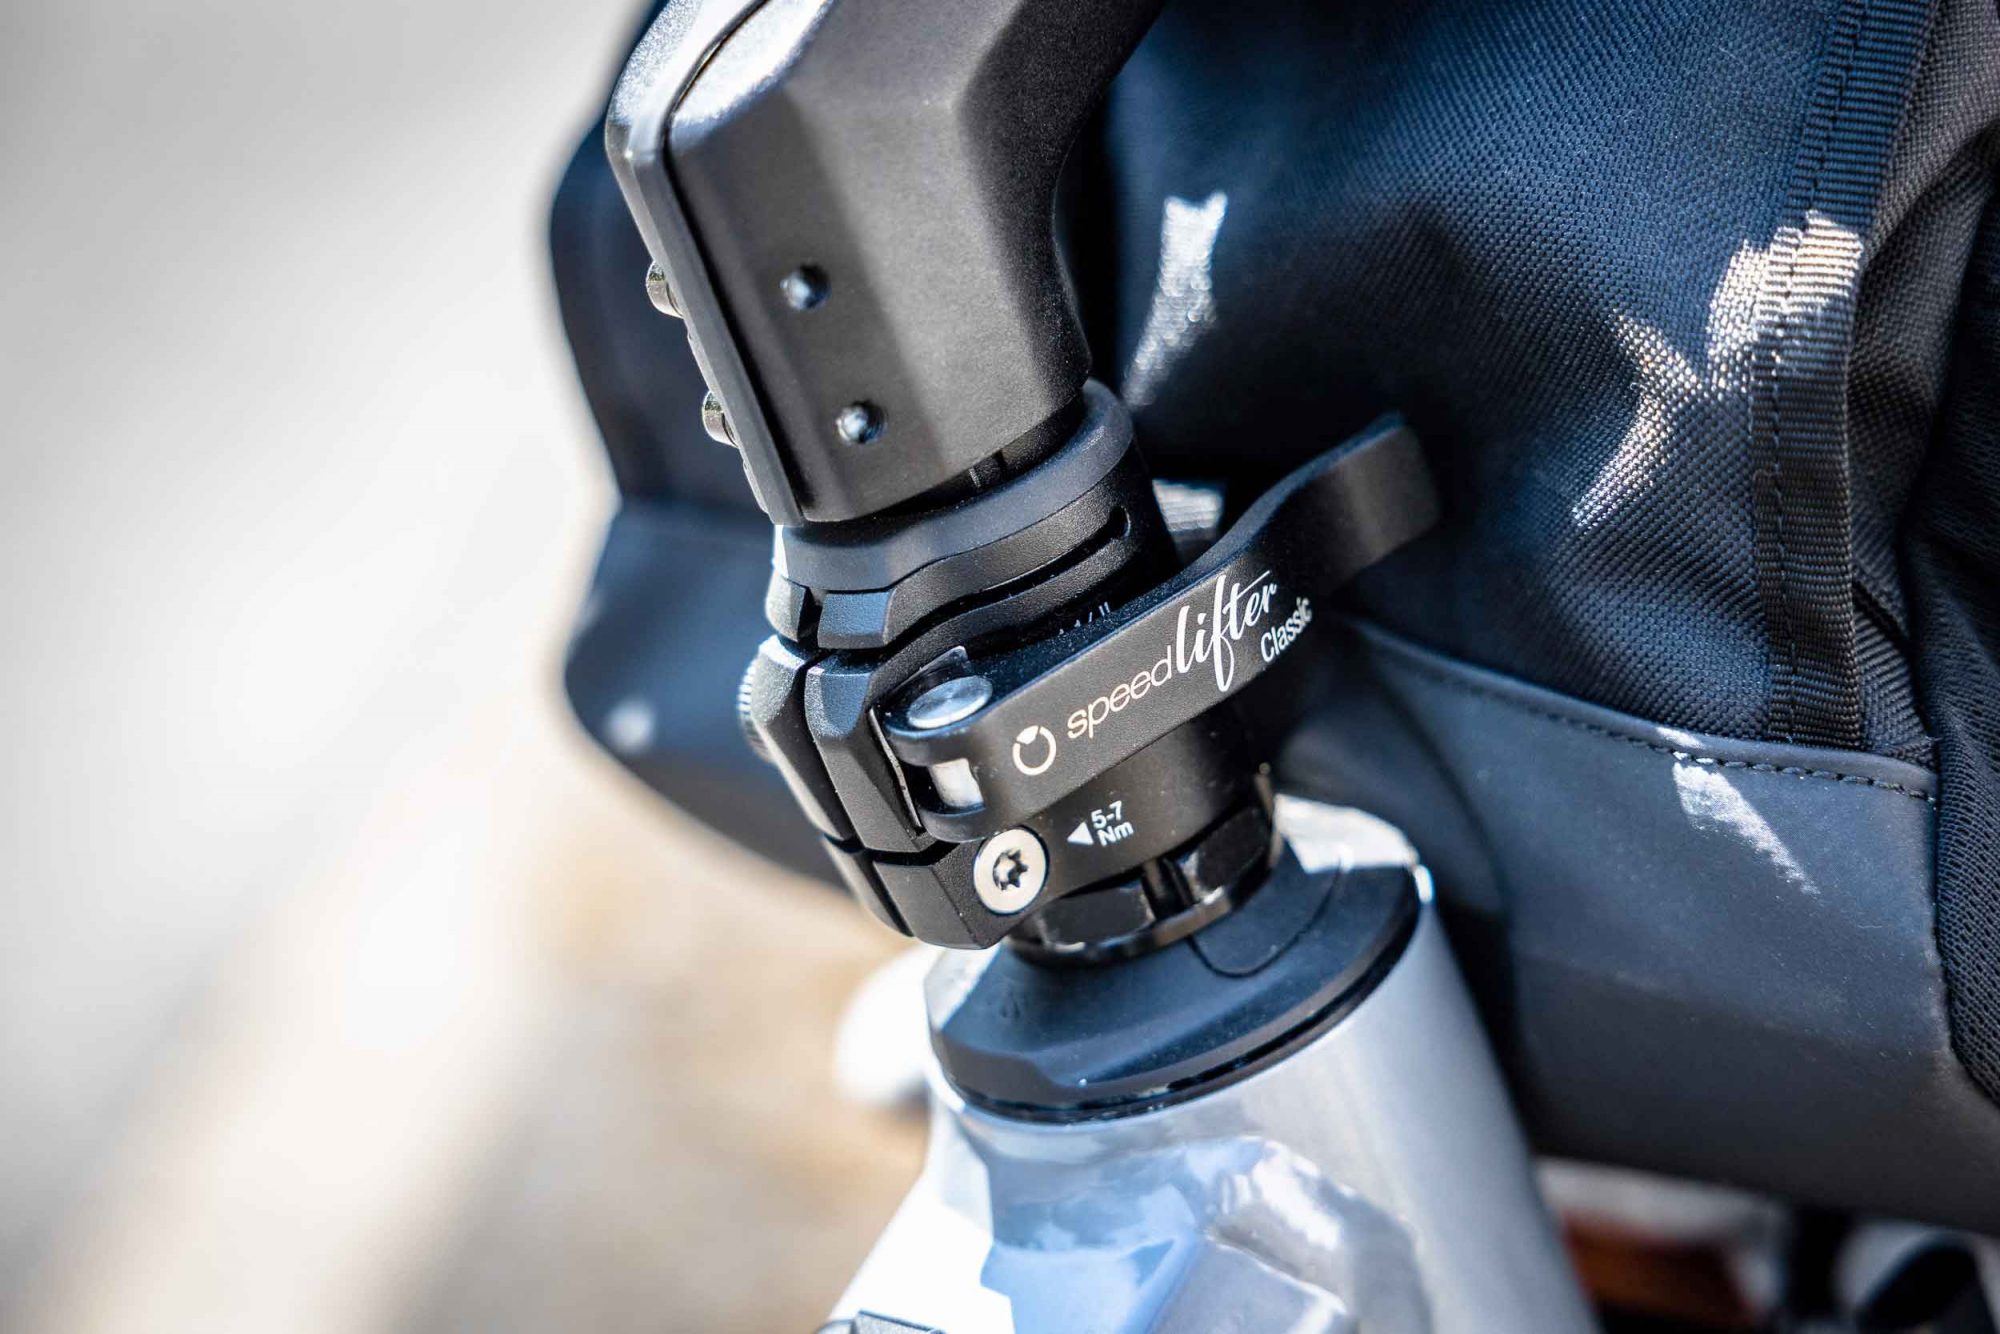 Thanks to speed-lifter, the handlebar height can be adjusted in seconds.